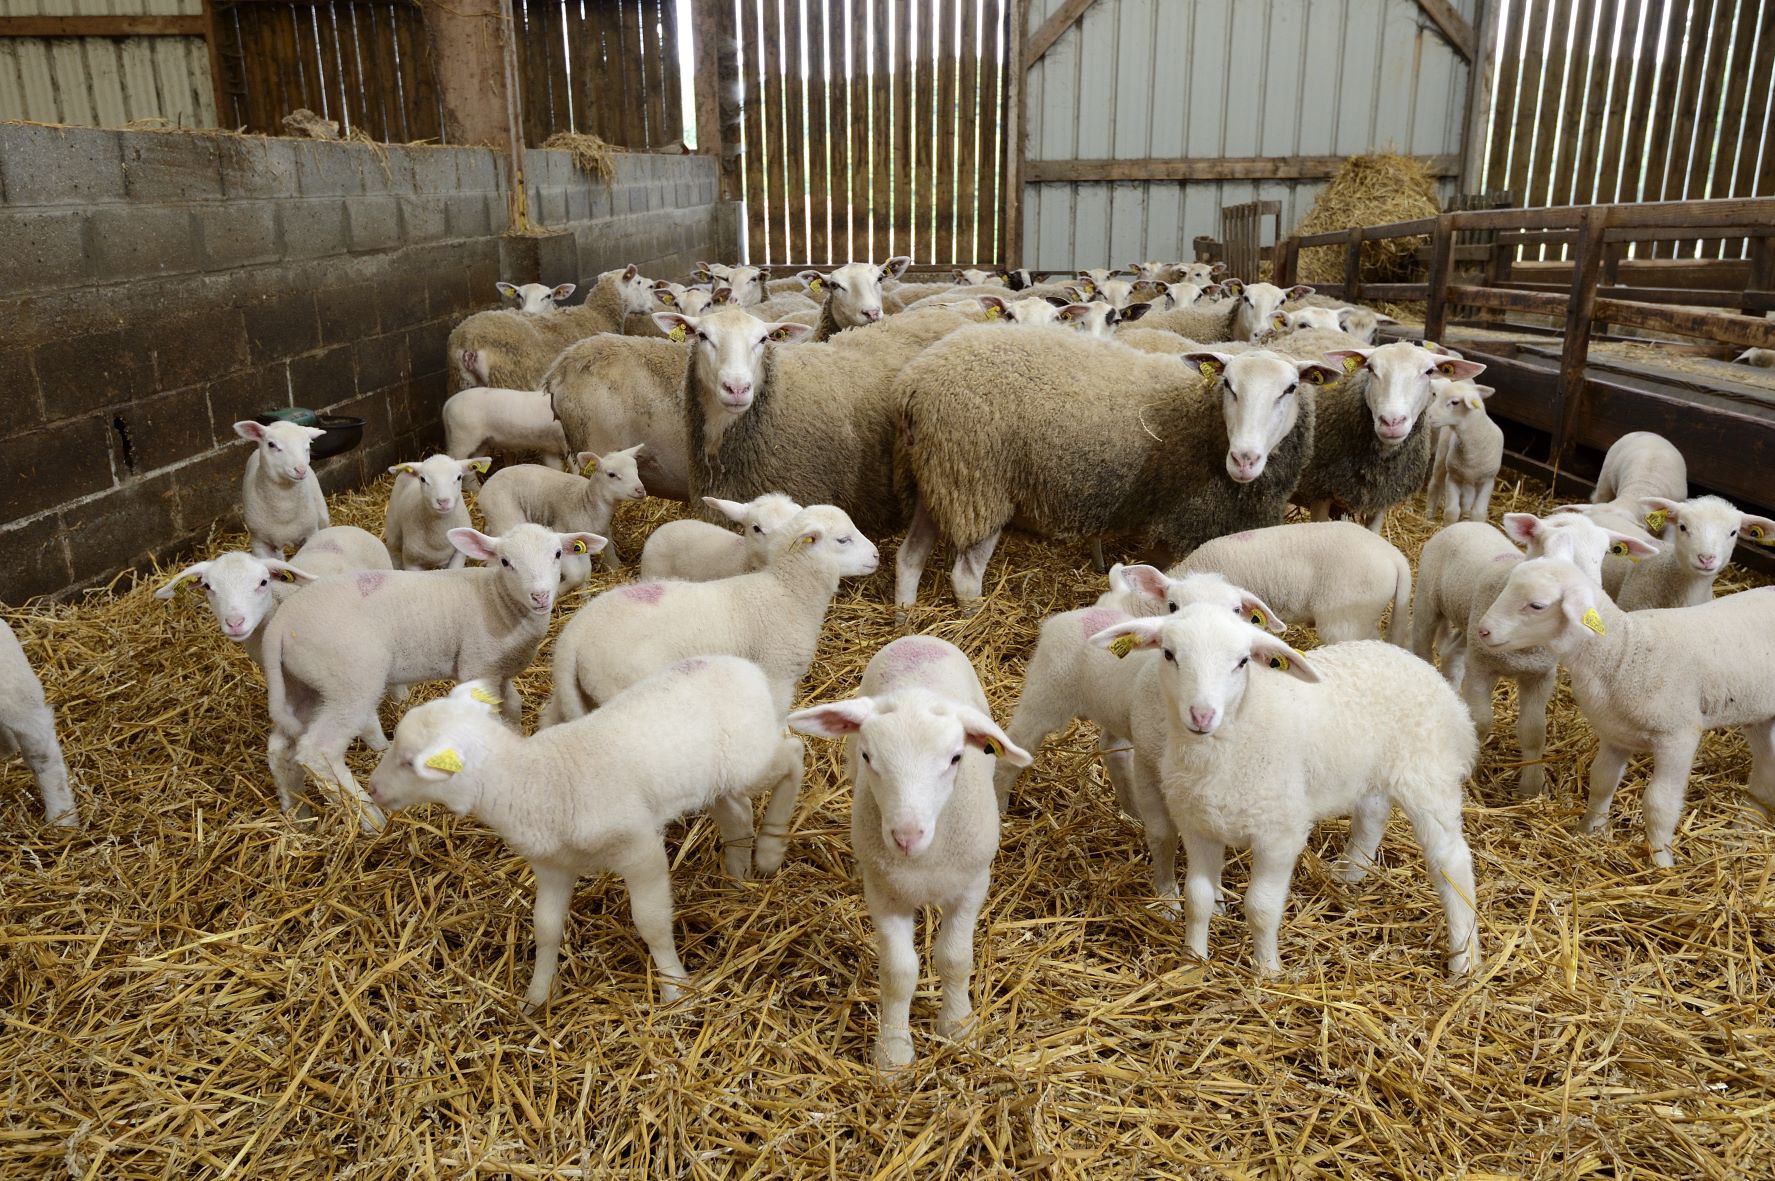 Numerous adult sheep and lambs in a pen inside a shed, straw on the floor